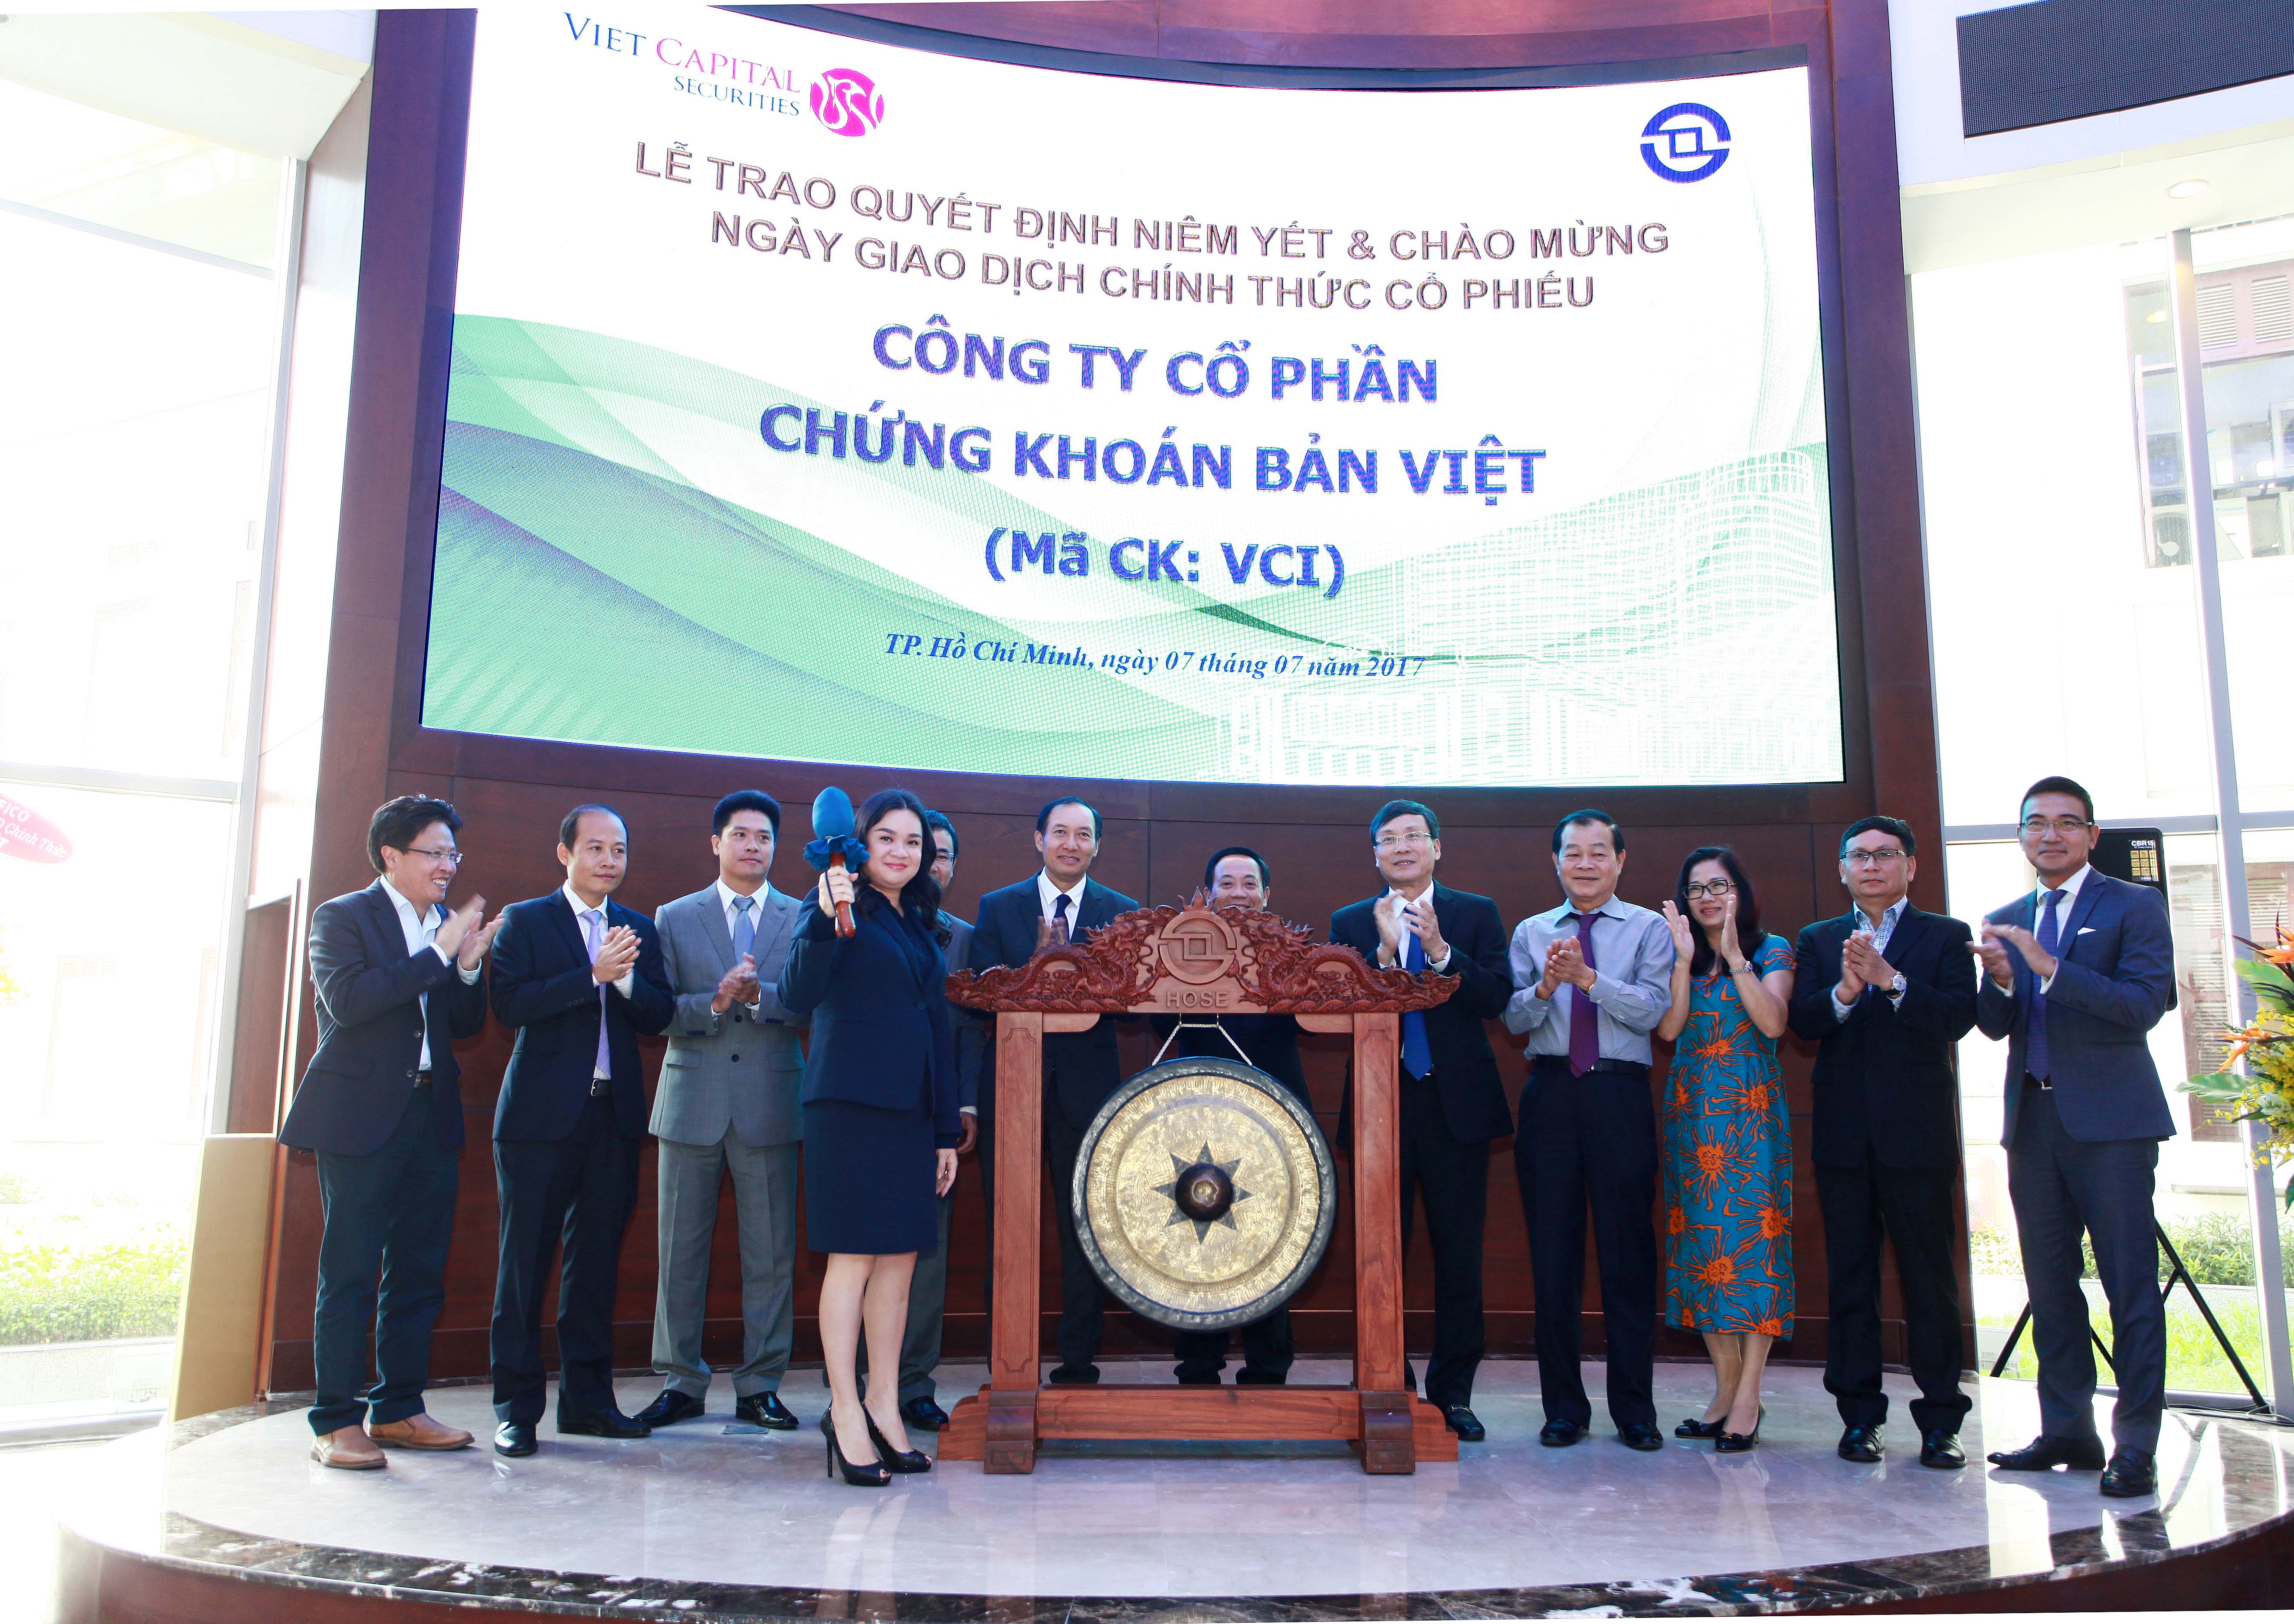 shares of viet capital securities hit the ceiling on first trading day